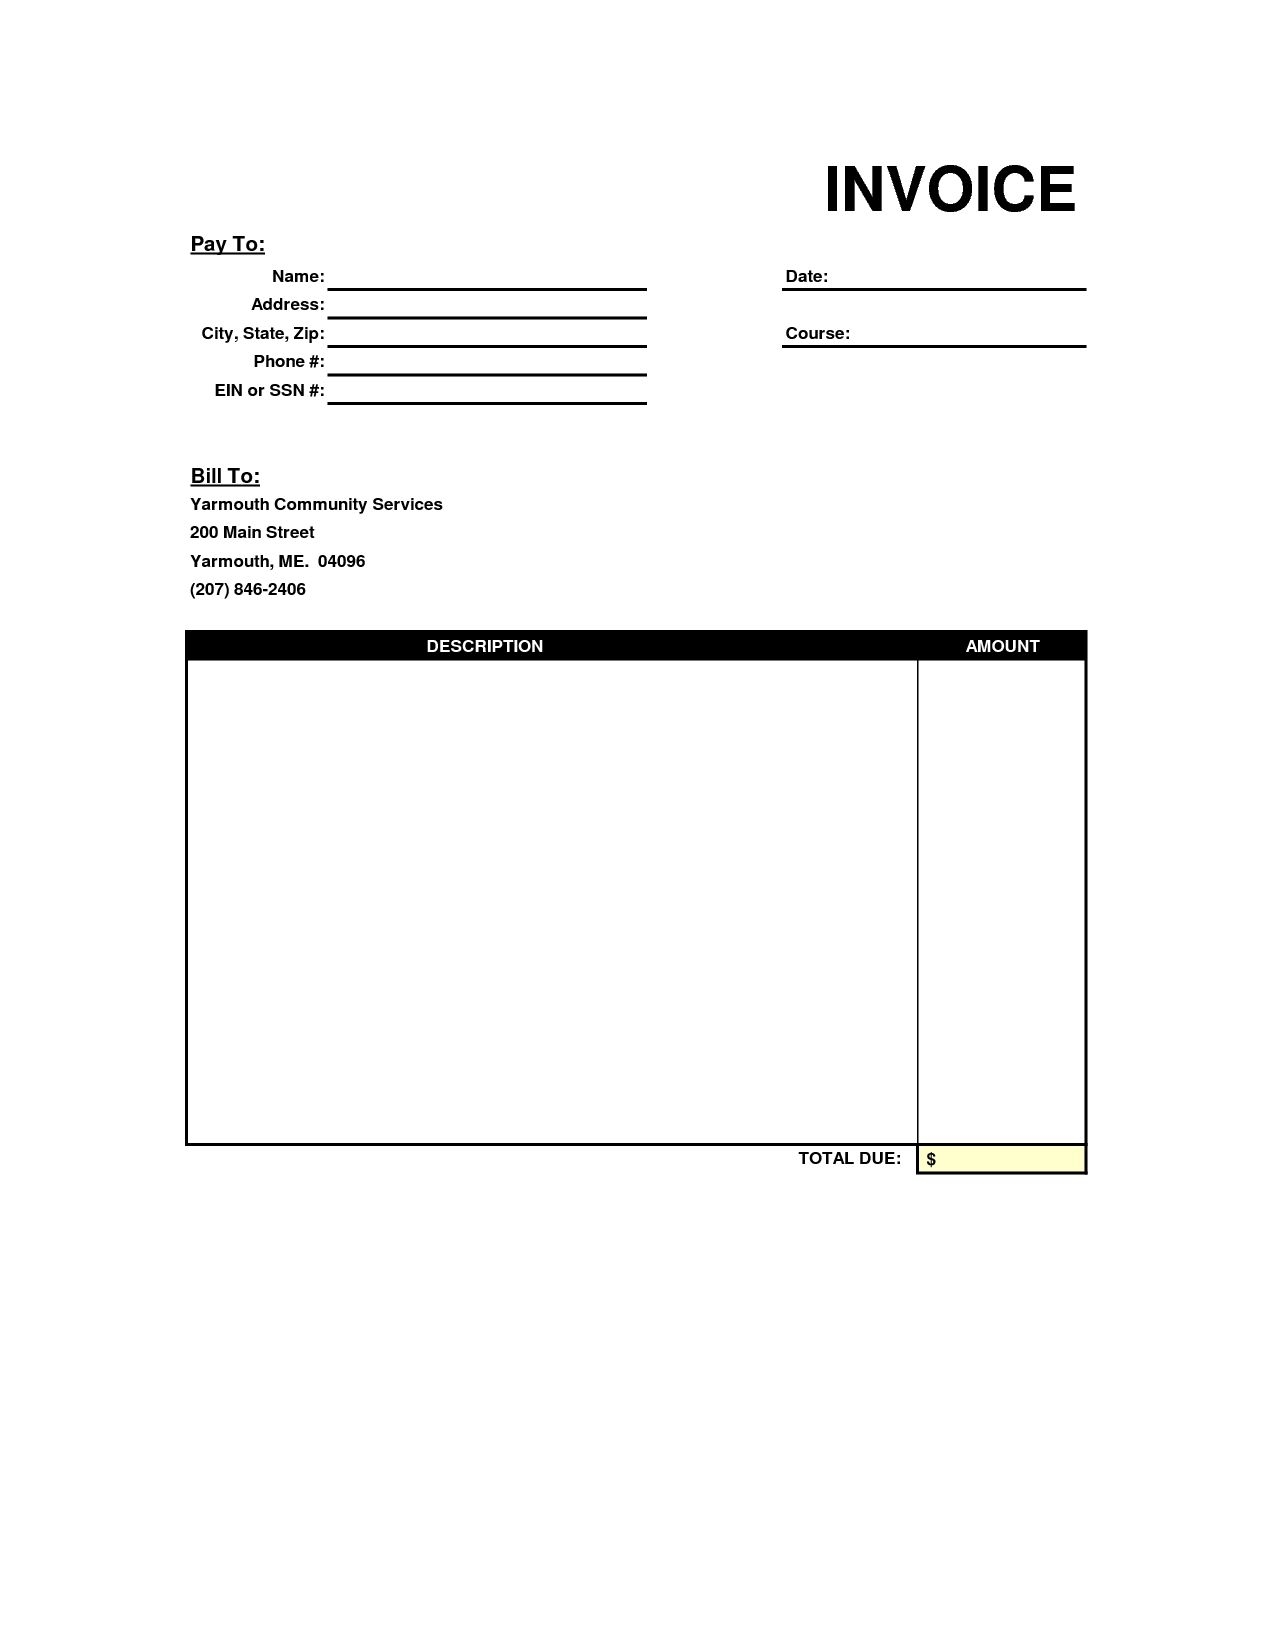 Fill In Blank Invoice Invoice Template Ideas